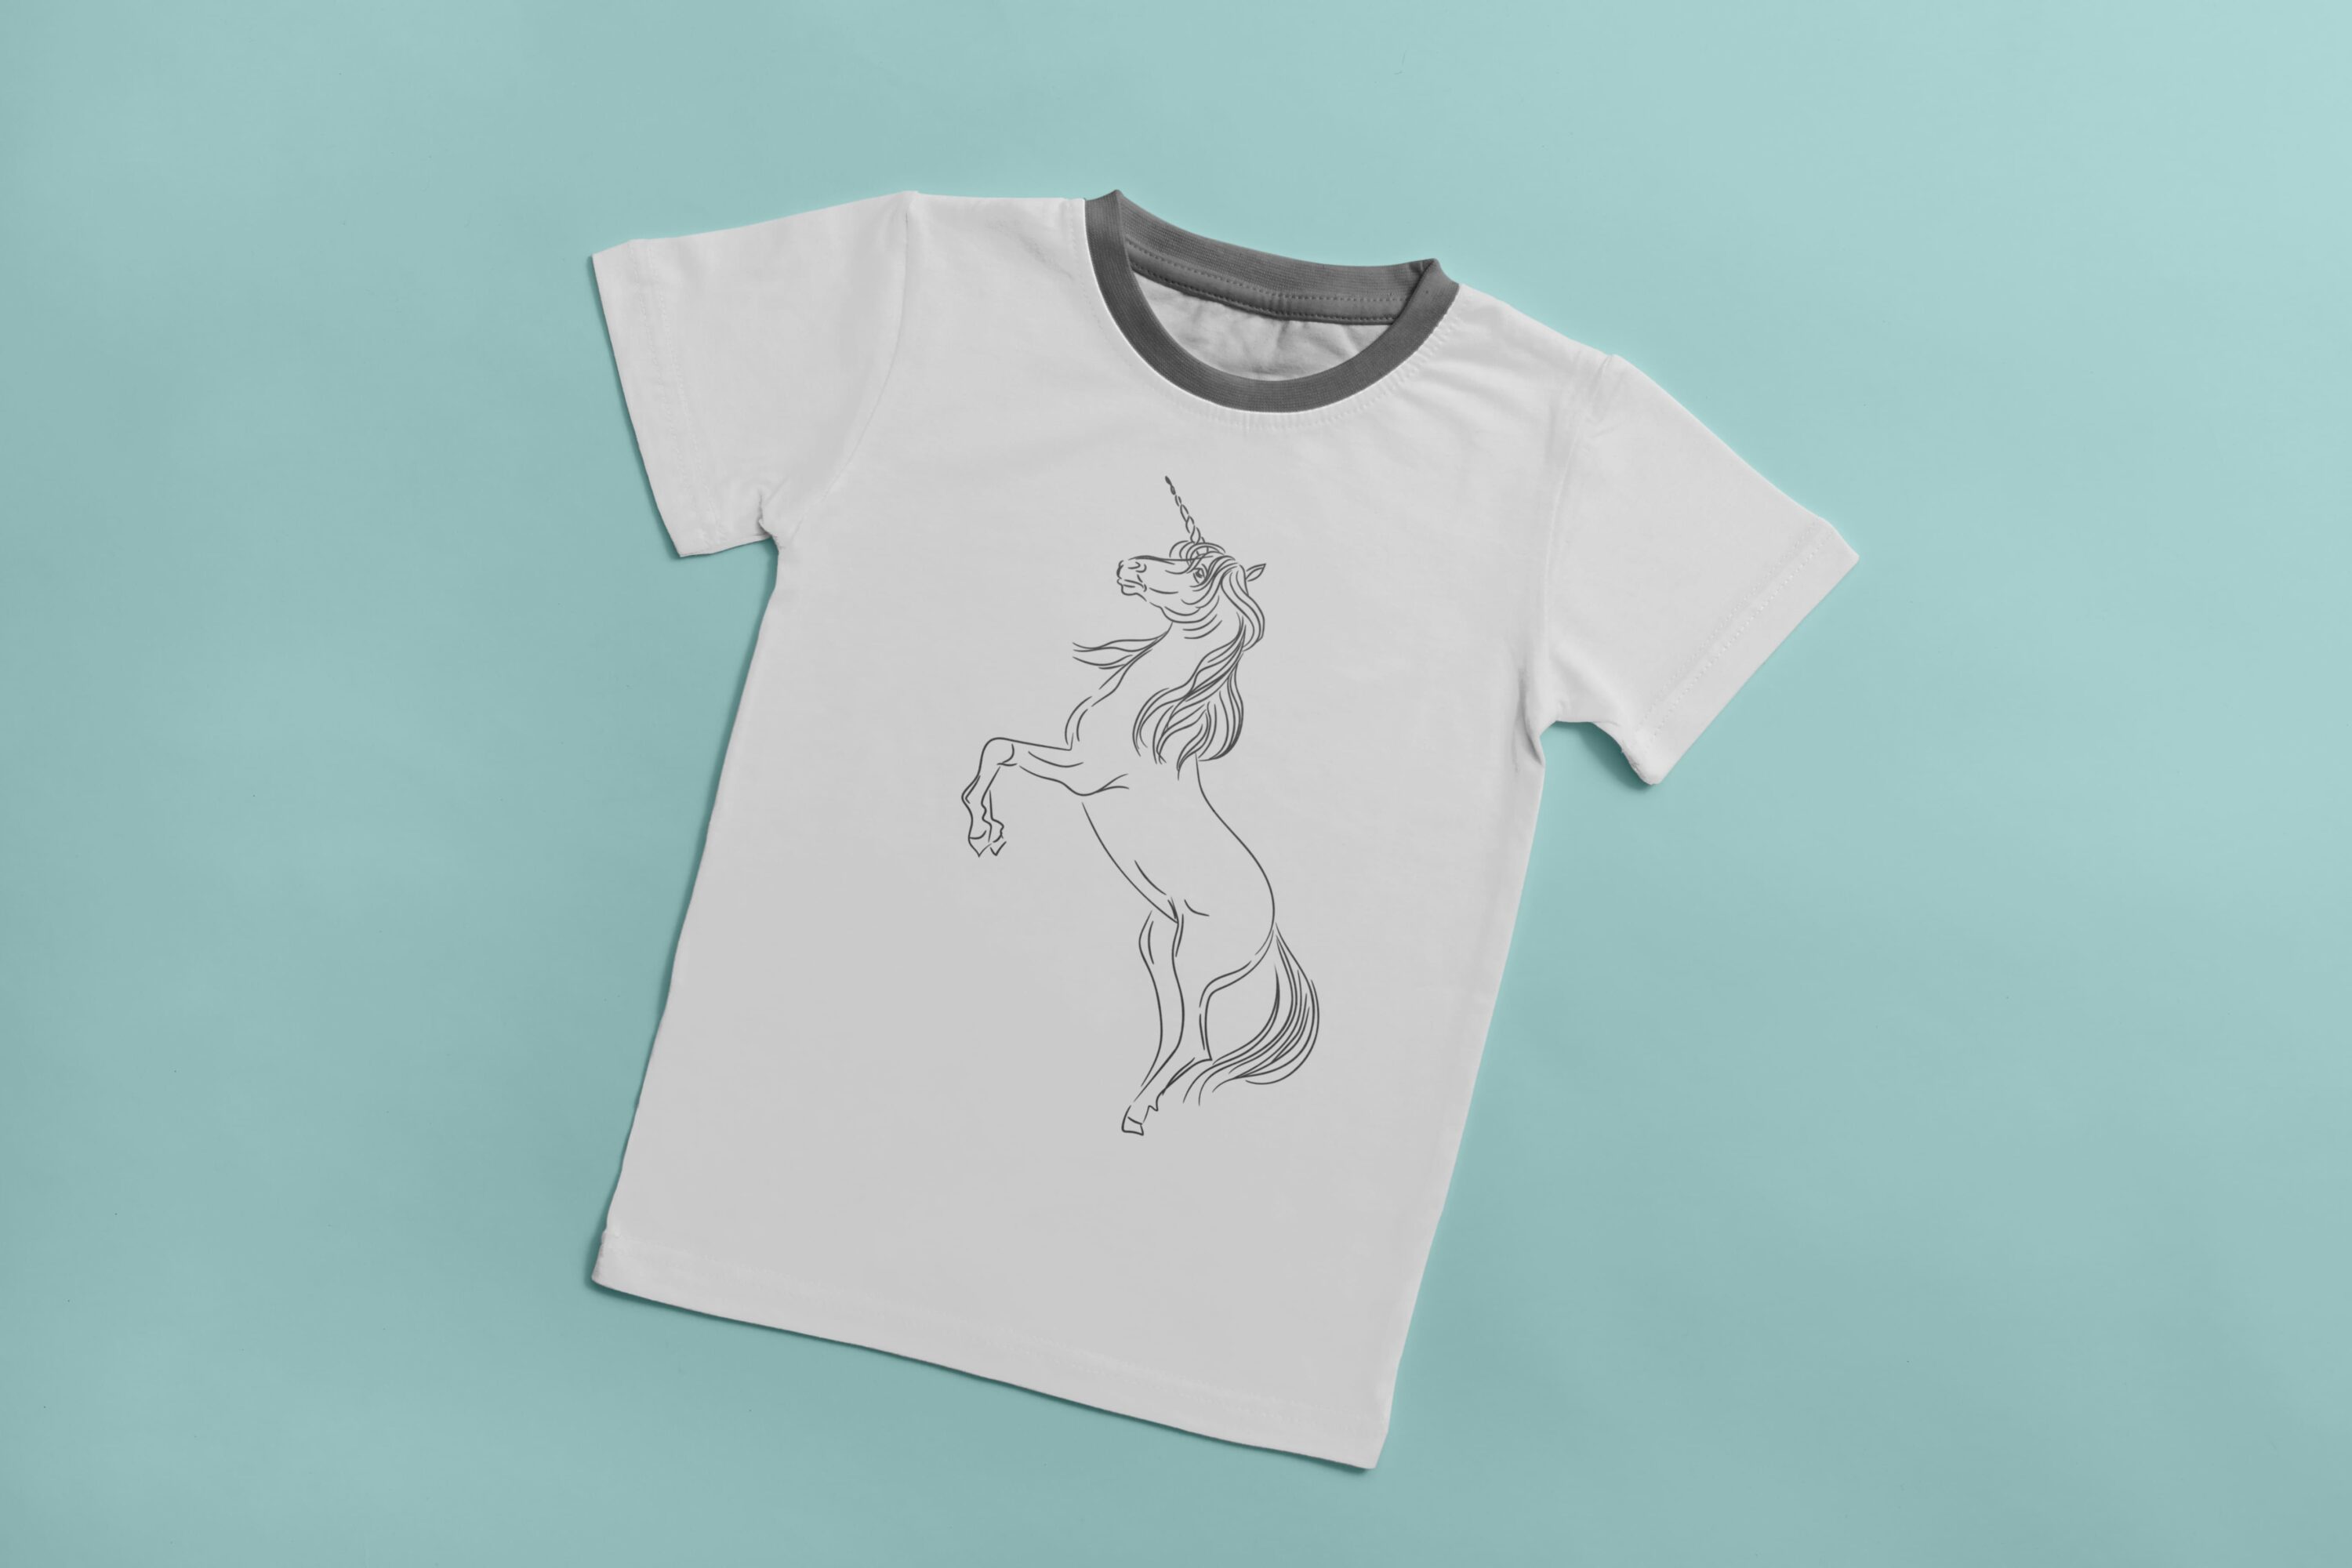 White t-shirt with a gray collar and a gray silhouette of a unicorn on a light blue background.